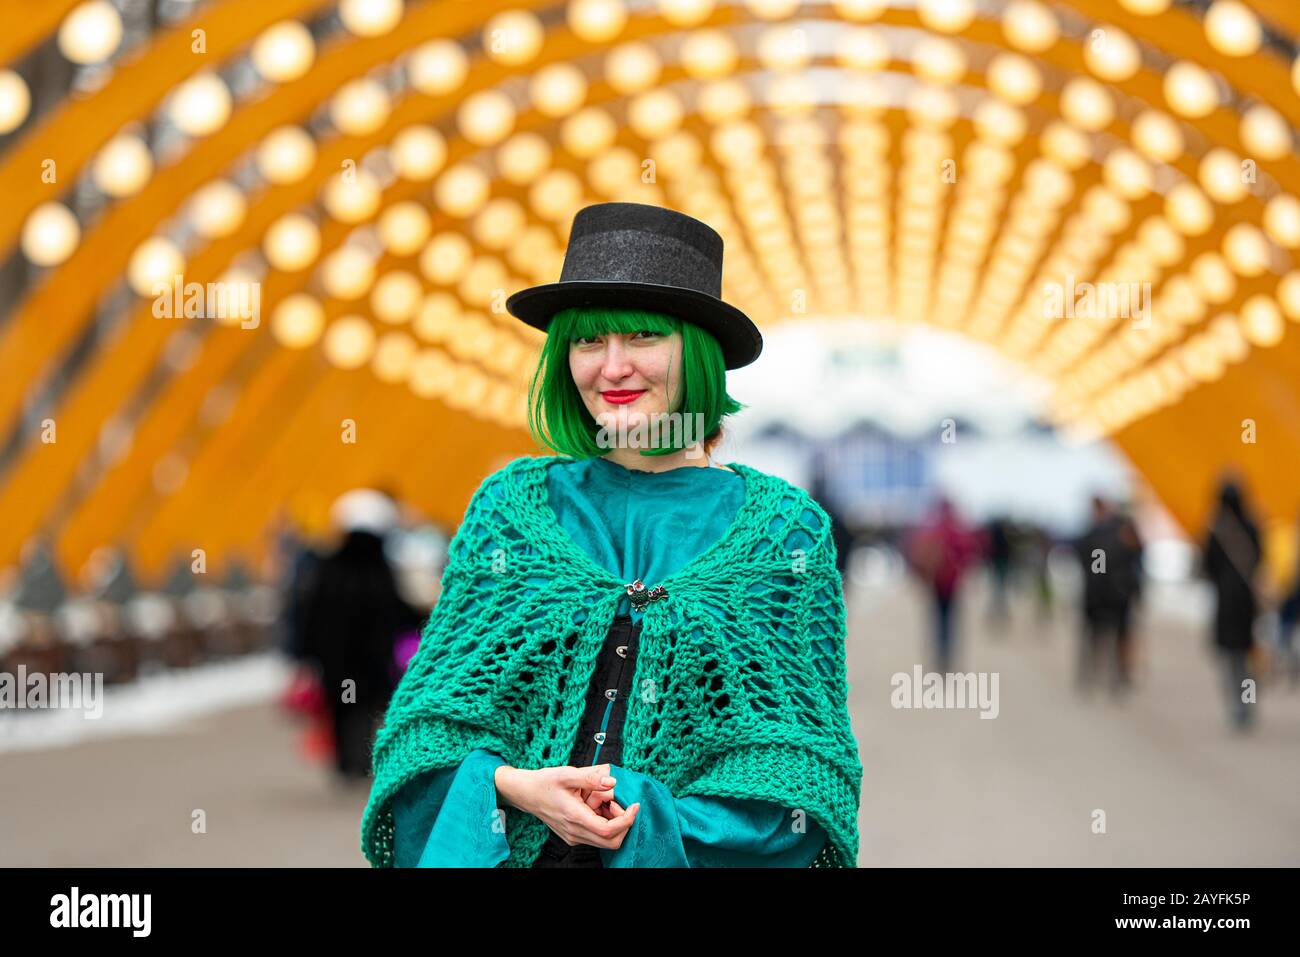 MOSCOW - MAR 16: People celebrating St. Patrick's Day in Sokol'niki Park in Moscow on March 16. 2019 in Russia Stock Photo